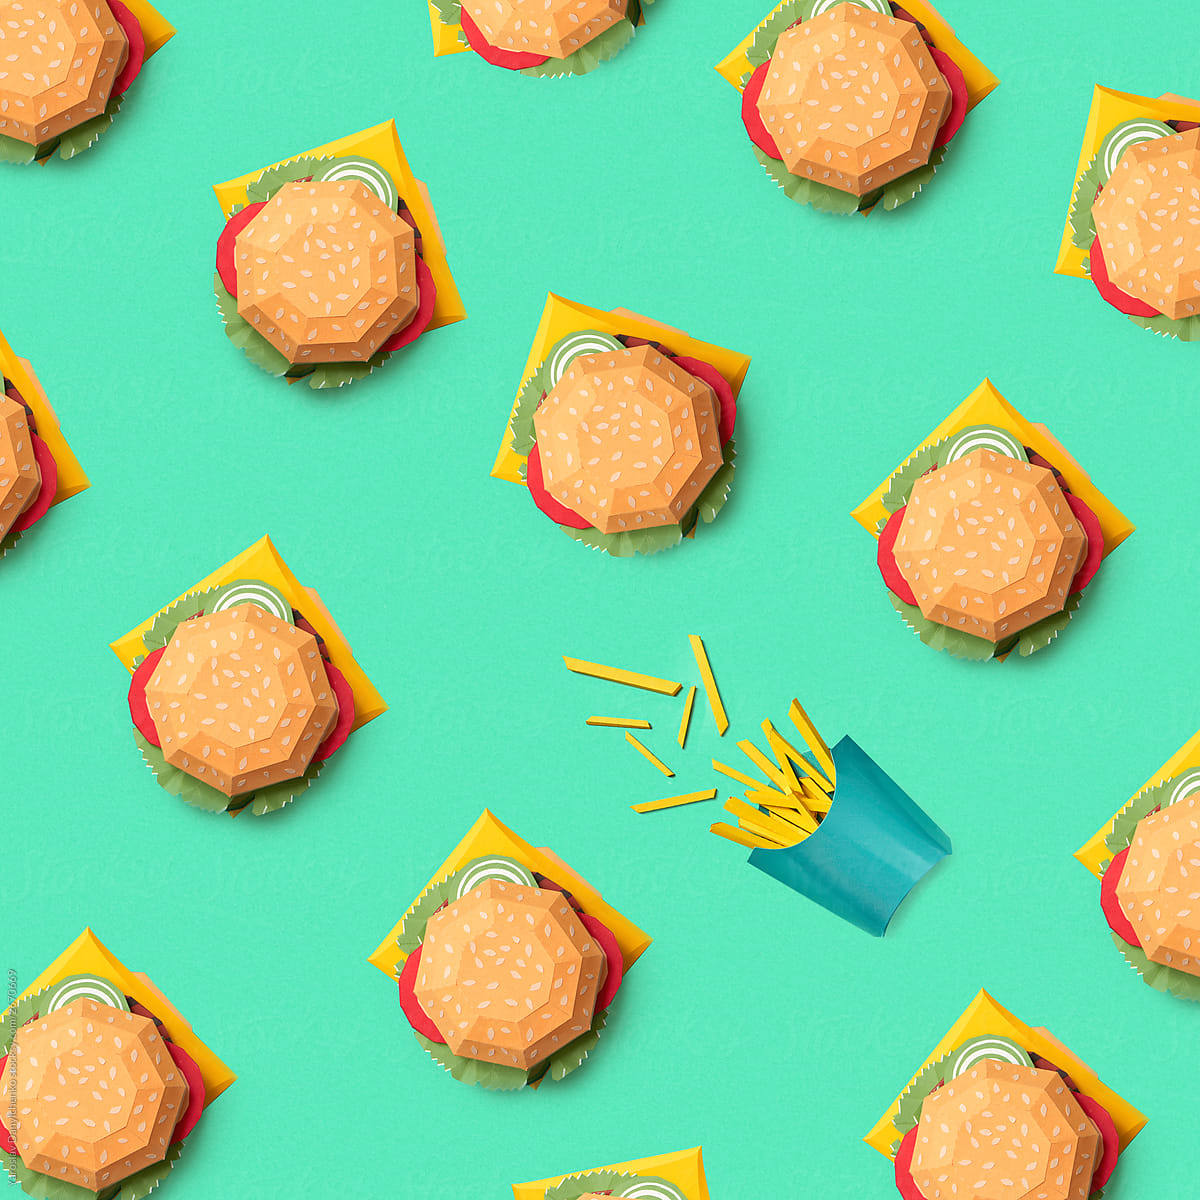 Paper craft french fries amidst burgers